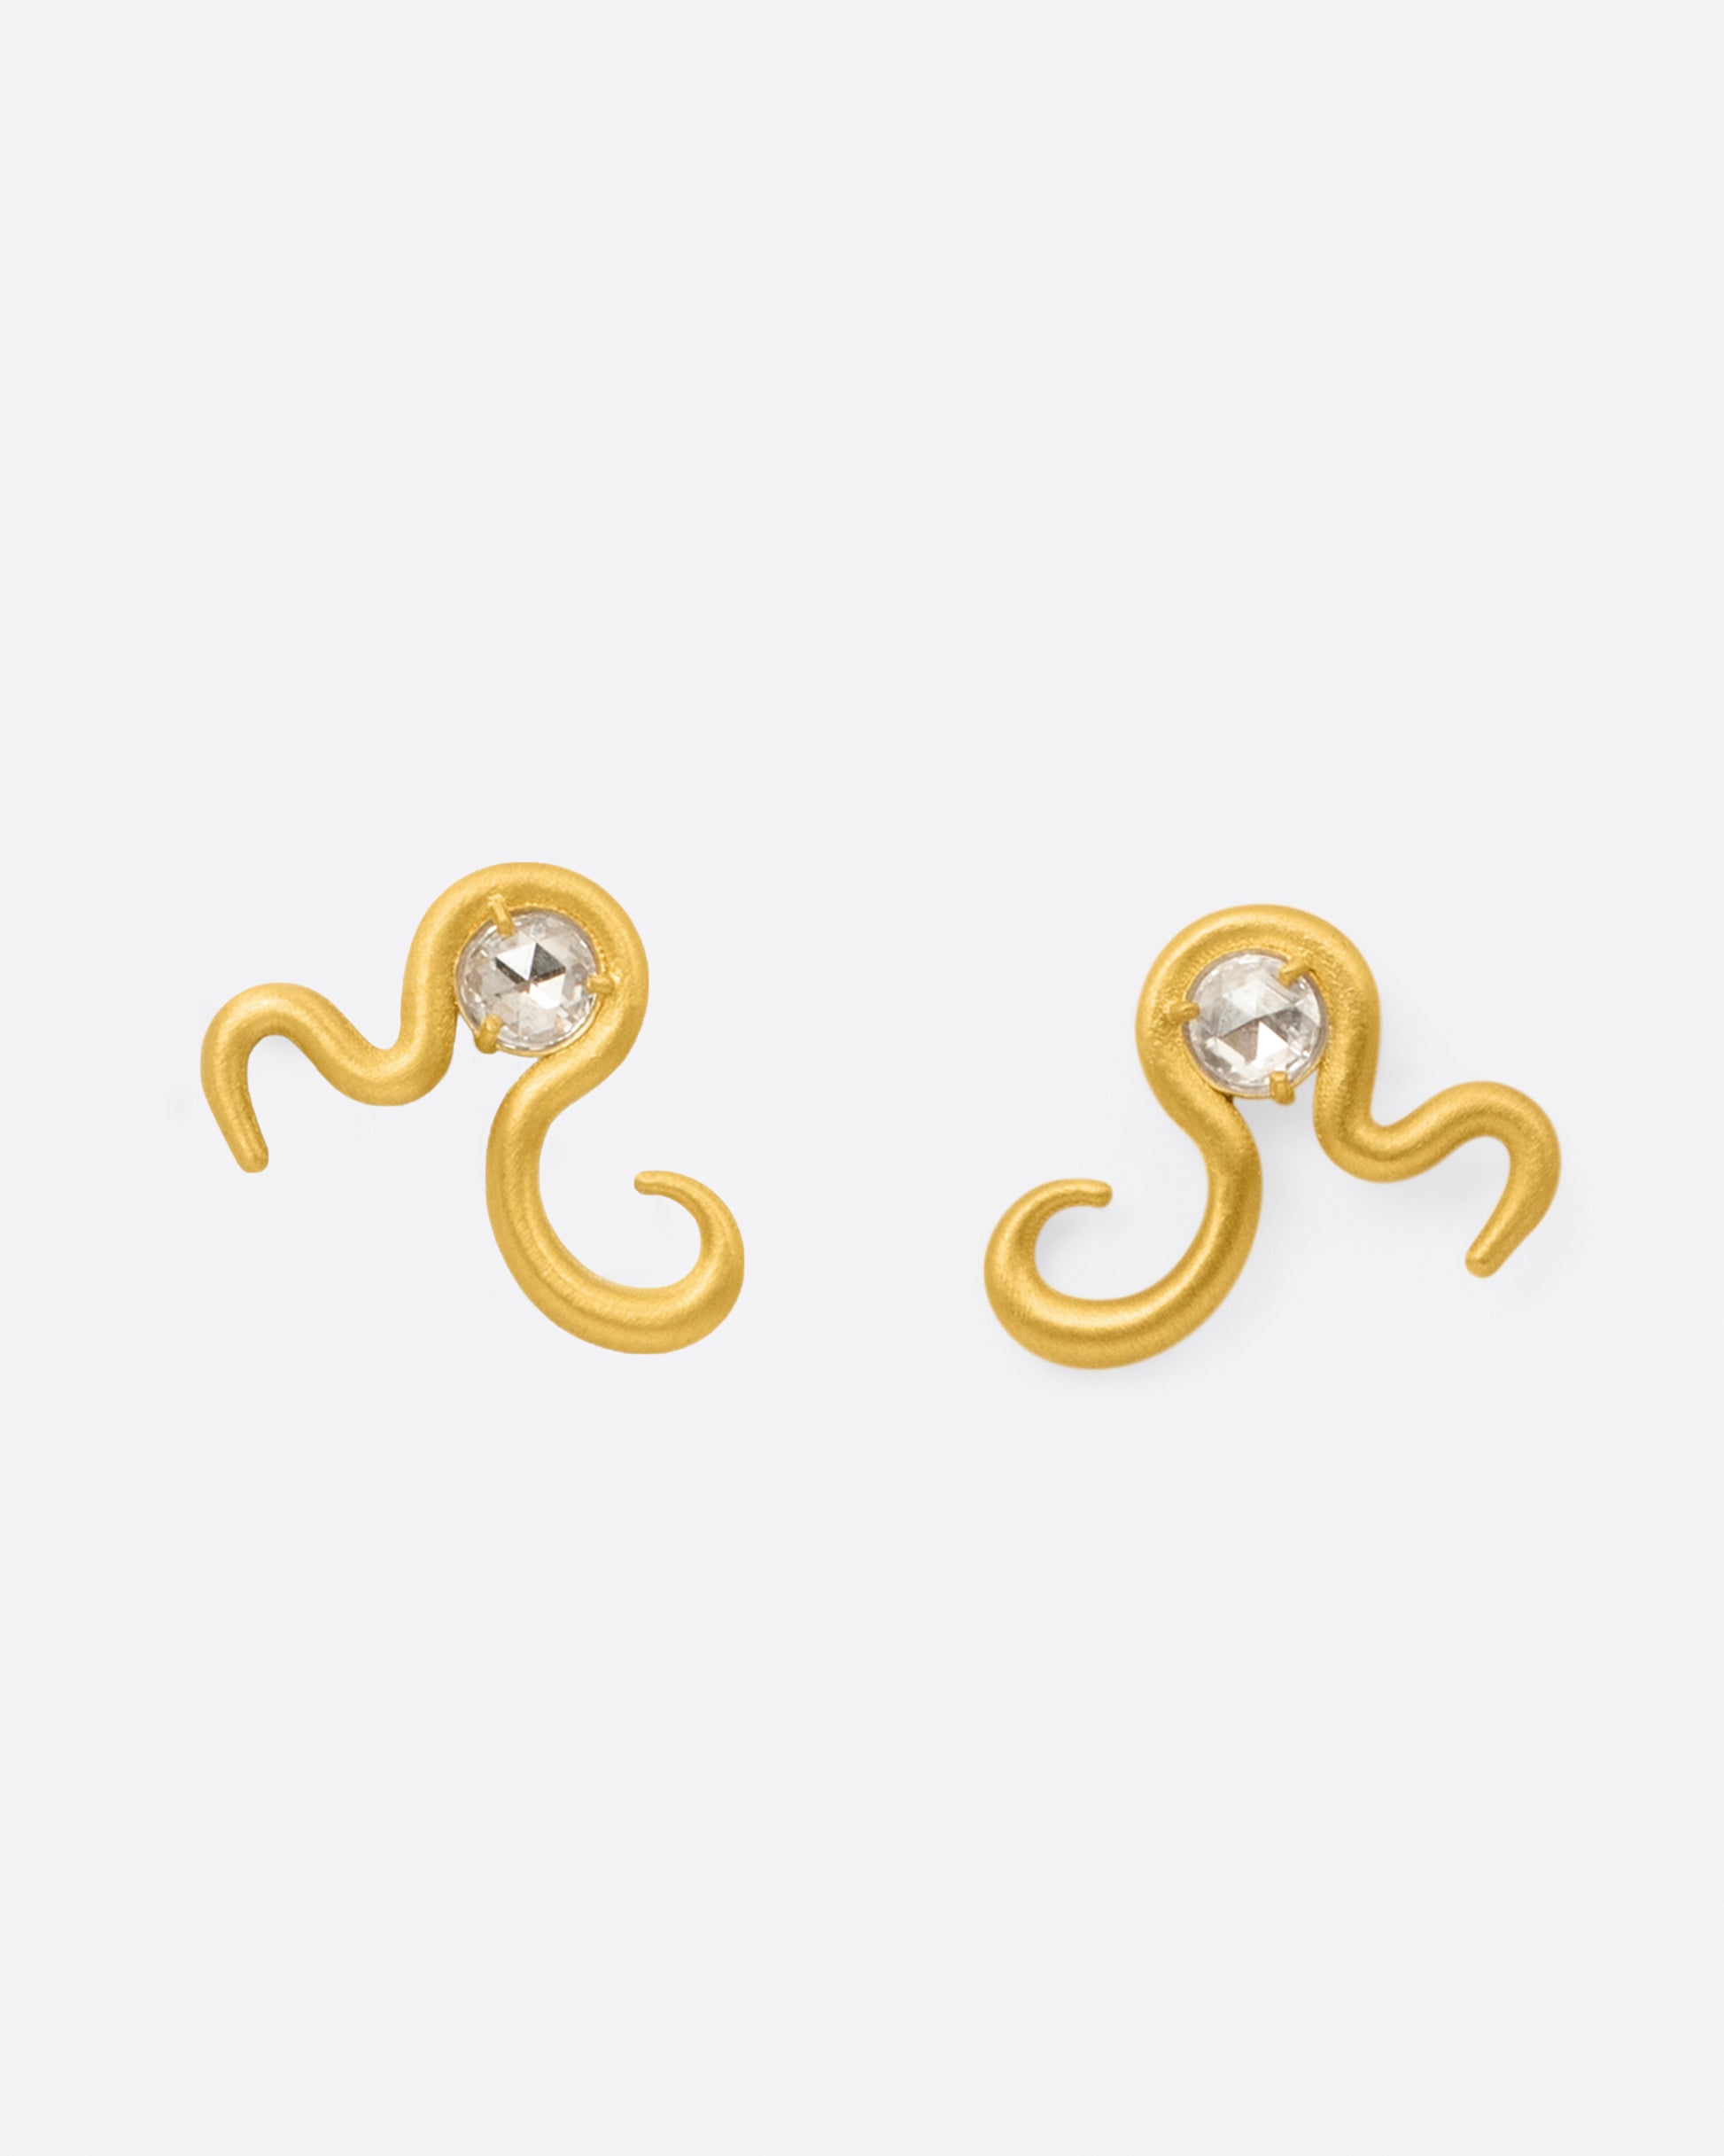 A pair of high karat yellow gold curved snake stud earrings with a rose cut diamond at their centers, shown from the front.